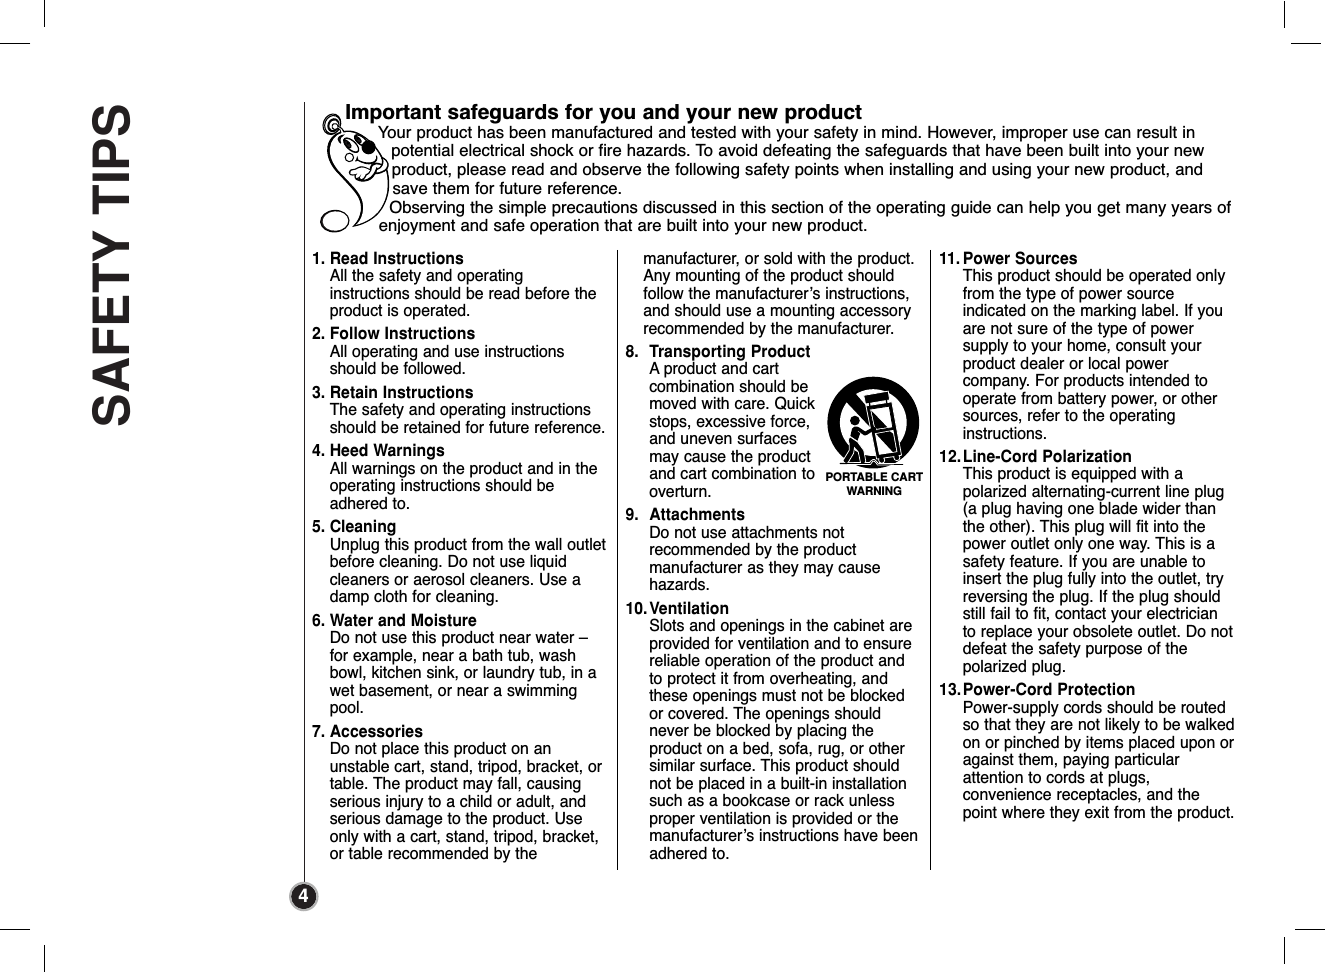 SAFETY TIPS41. Read InstructionsAll the safety and operating instructions should be read before theproduct is operated. 2. Follow InstructionsAll operating and use instructionsshould be followed.3. Retain InstructionsThe safety and operating instructionsshould be retained for future reference.4. Heed WarningsAll warnings on the product and in theoperating instructions should beadhered to.5. CleaningUnplug this product from the wall outletbefore cleaning. Do not use liquidcleaners or aerosol cleaners. Use adamp cloth for cleaning.6. Water and MoistureDo not use this product near water –for example, near a bath tub, washbowl, kitchen sink, or laundry tub, in awet basement, or near a swimmingpool.7. AccessoriesDo not place this product on an unstable cart, stand, tripod, bracket, ortable. The product may fall, causingserious injury to a child or adult, andserious damage to the product. Useonly with a cart, stand, tripod, bracket,or table recommended by the manufacturer, or sold with the product.Any mounting of the product should follow the manufacturer’s instructions,and should use a mounting accessory recommended by the manufacturer.8. Transporting ProductA product and cartcombination should bemoved with care. Quickstops, excessive force,and uneven surfacesmay cause the productand cart combination tooverturn.9. AttachmentsDo not use attachments not recommended by the product manufacturer as they may cause hazards.10.VentilationSlots and openings in the cabinet areprovided for ventilation and to ensurereliable operation of the product andto protect it from overheating, andthese openings must not be blockedor covered. The openings shouldnever be blocked by placing the product on a bed, sofa, rug, or othersimilar surface. This product shouldnot be placed in a built-in installationsuch as a bookcase or rack unlessproper ventilation is provided or themanufacturer’s instructions have beenadhered to.11. Power SourcesThis product should be operated onlyfrom the type of power source indicated on the marking label. If youare not sure of the type of power supply to your home, consult yourproduct dealer or local power company. For products intended tooperate from battery power, or othersources, refer to the operating instructions.12.Line-Cord PolarizationThis product is equipped with a polarized alternating-current line plug(a plug having one blade wider thanthe other). This plug will fit into thepower outlet only one way. This is asafety feature. If you are unable toinsert the plug fully into the outlet, tryreversing the plug. If the plug shouldstill fail to fit, contact your electricianto replace your obsolete outlet. Do notdefeat the safety purpose of the polarized plug.13.Power-Cord ProtectionPower-supply cords should be routedso that they are not likely to be walkedon or pinched by items placed upon oragainst them, paying particular attention to cords at plugs, convenience receptacles, and thepoint where they exit from the product.Important safeguards for you and your new productYour product has been manufactured and tested with your safety in mind. However, improper use can result inpotential electrical shock or fire hazards. To avoid defeating the safeguards that have been built into your newproduct, please read and observe the following safety points when installing and using your new product, andsave them for future reference.Observing the simple precautions discussed in this section of the operating guide can help you get many years ofenjoyment and safe operation that are built into your new product.PORTABLE CARTWARNING